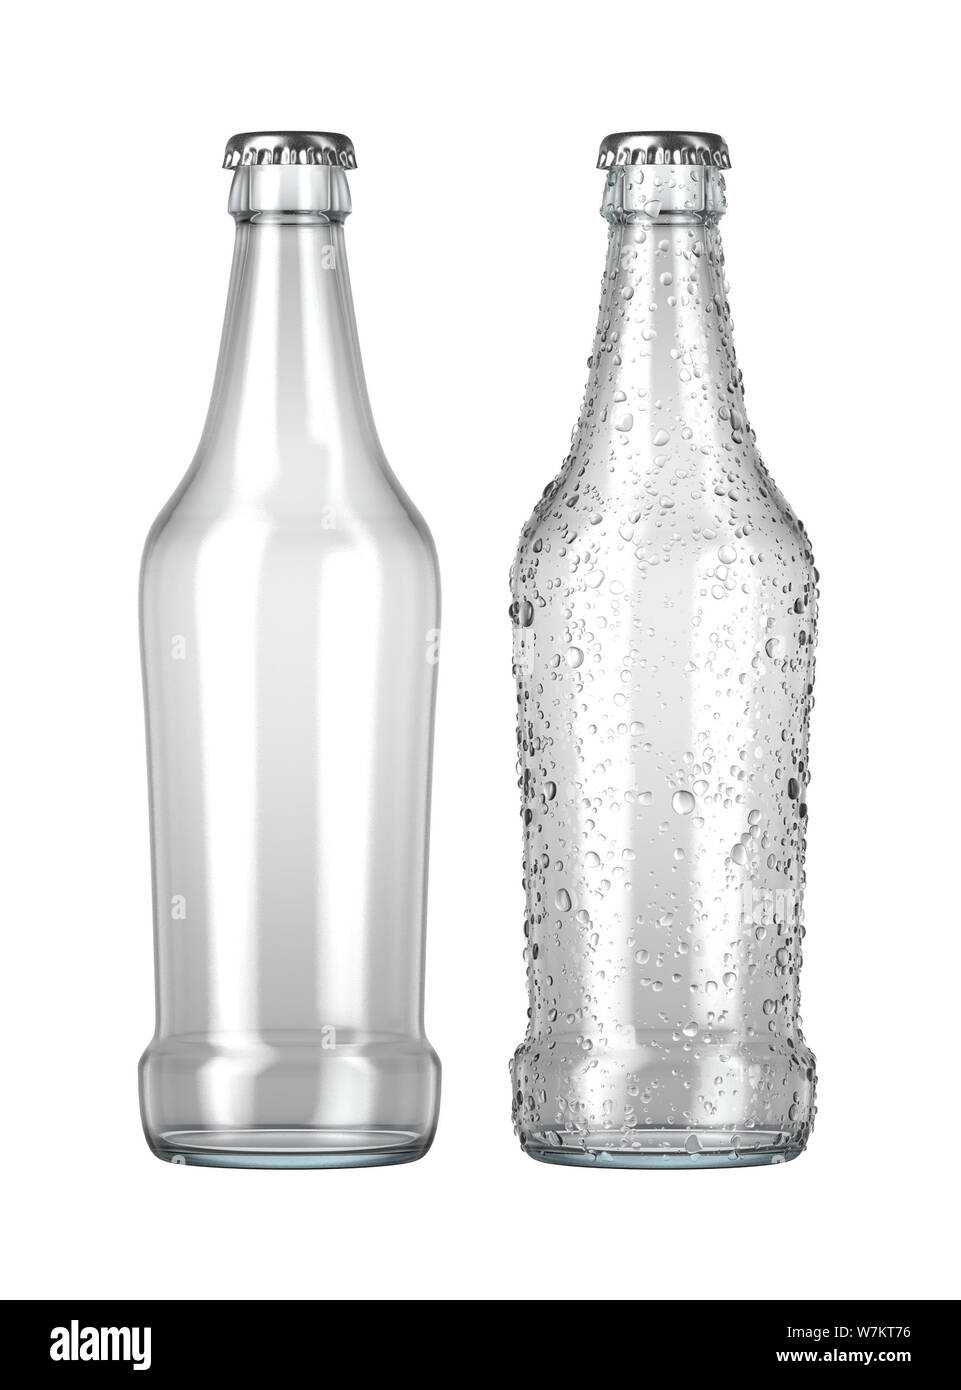 Cold Bottle Of Beer With Condensates Water Drops On It. Stock Photo,  Picture and Royalty Free Image. Image 52091586.